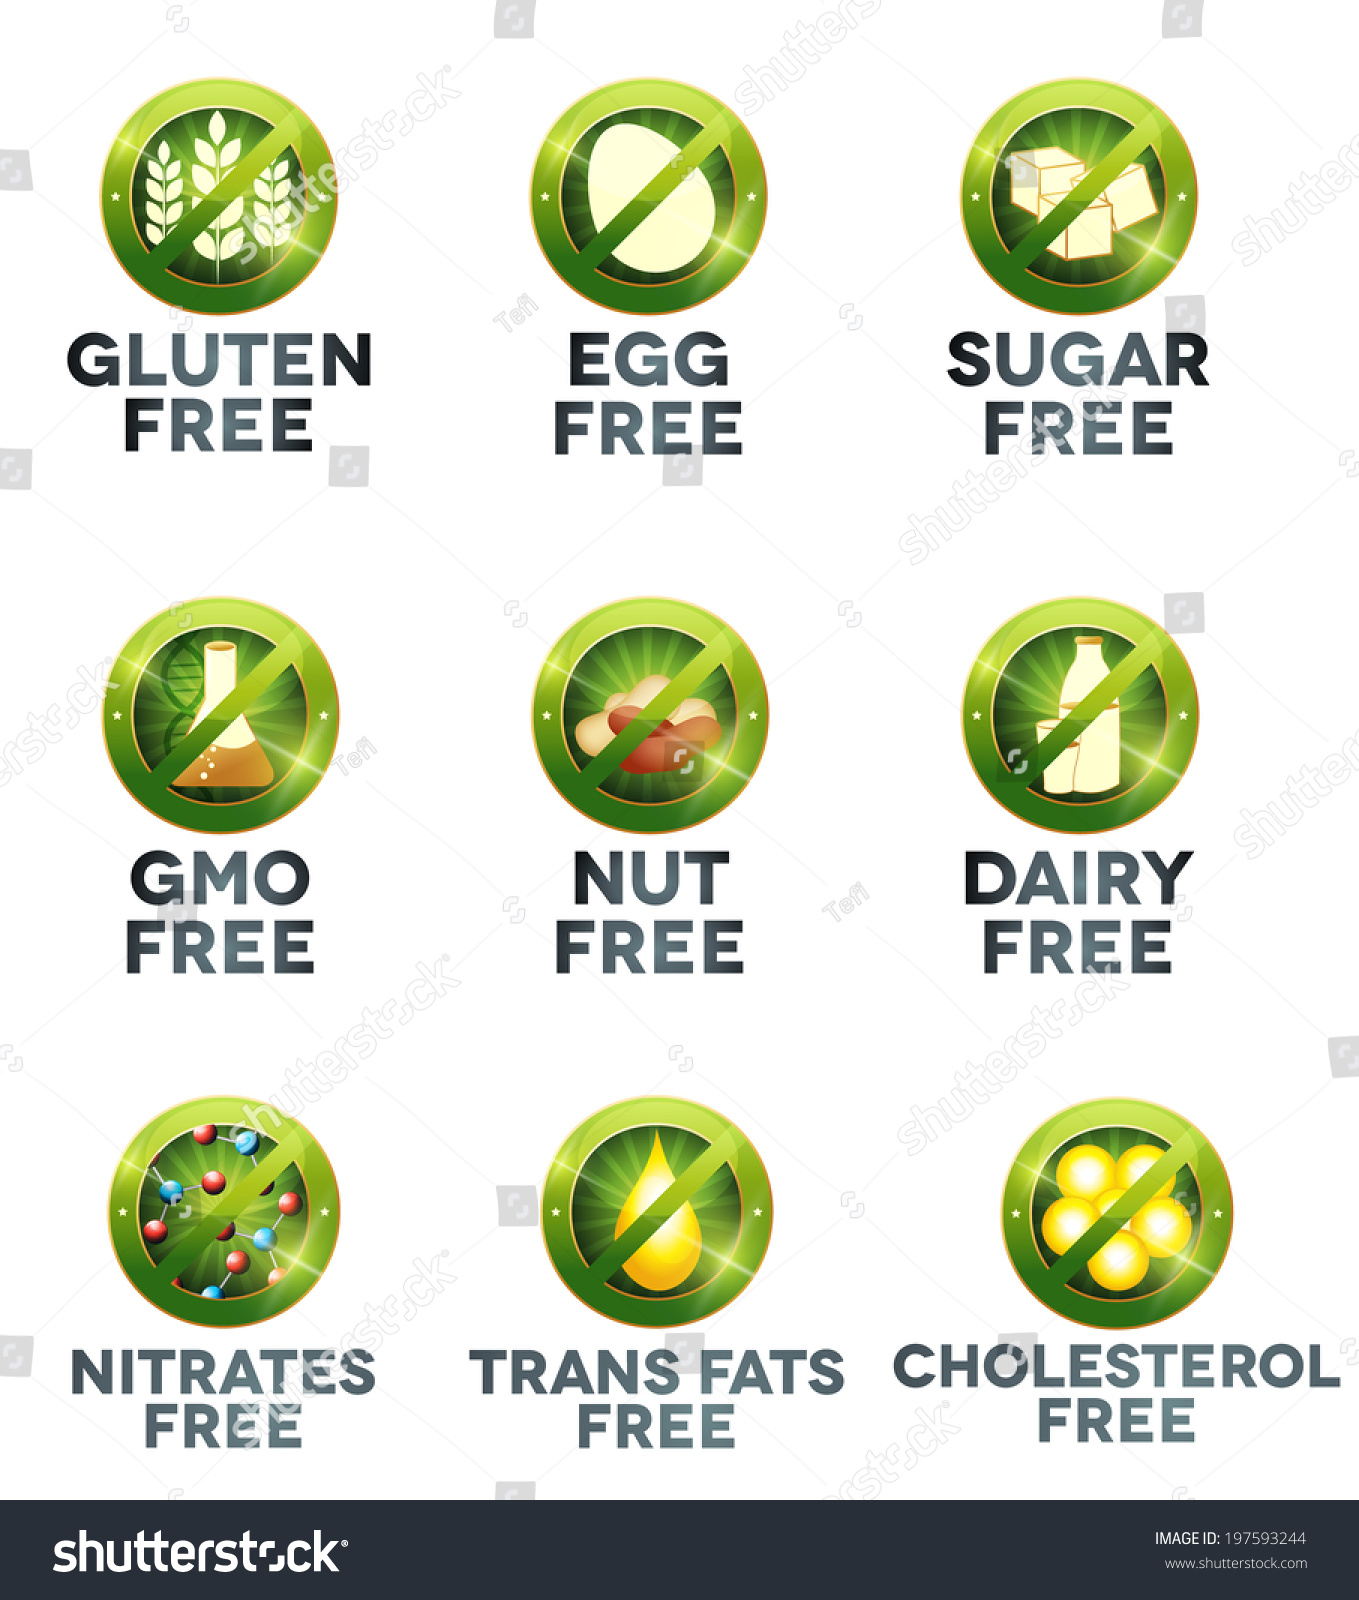 Food Diet Icon Collection Set Human Stock Vector Royalty Free 197593244 Shutterstock 2467